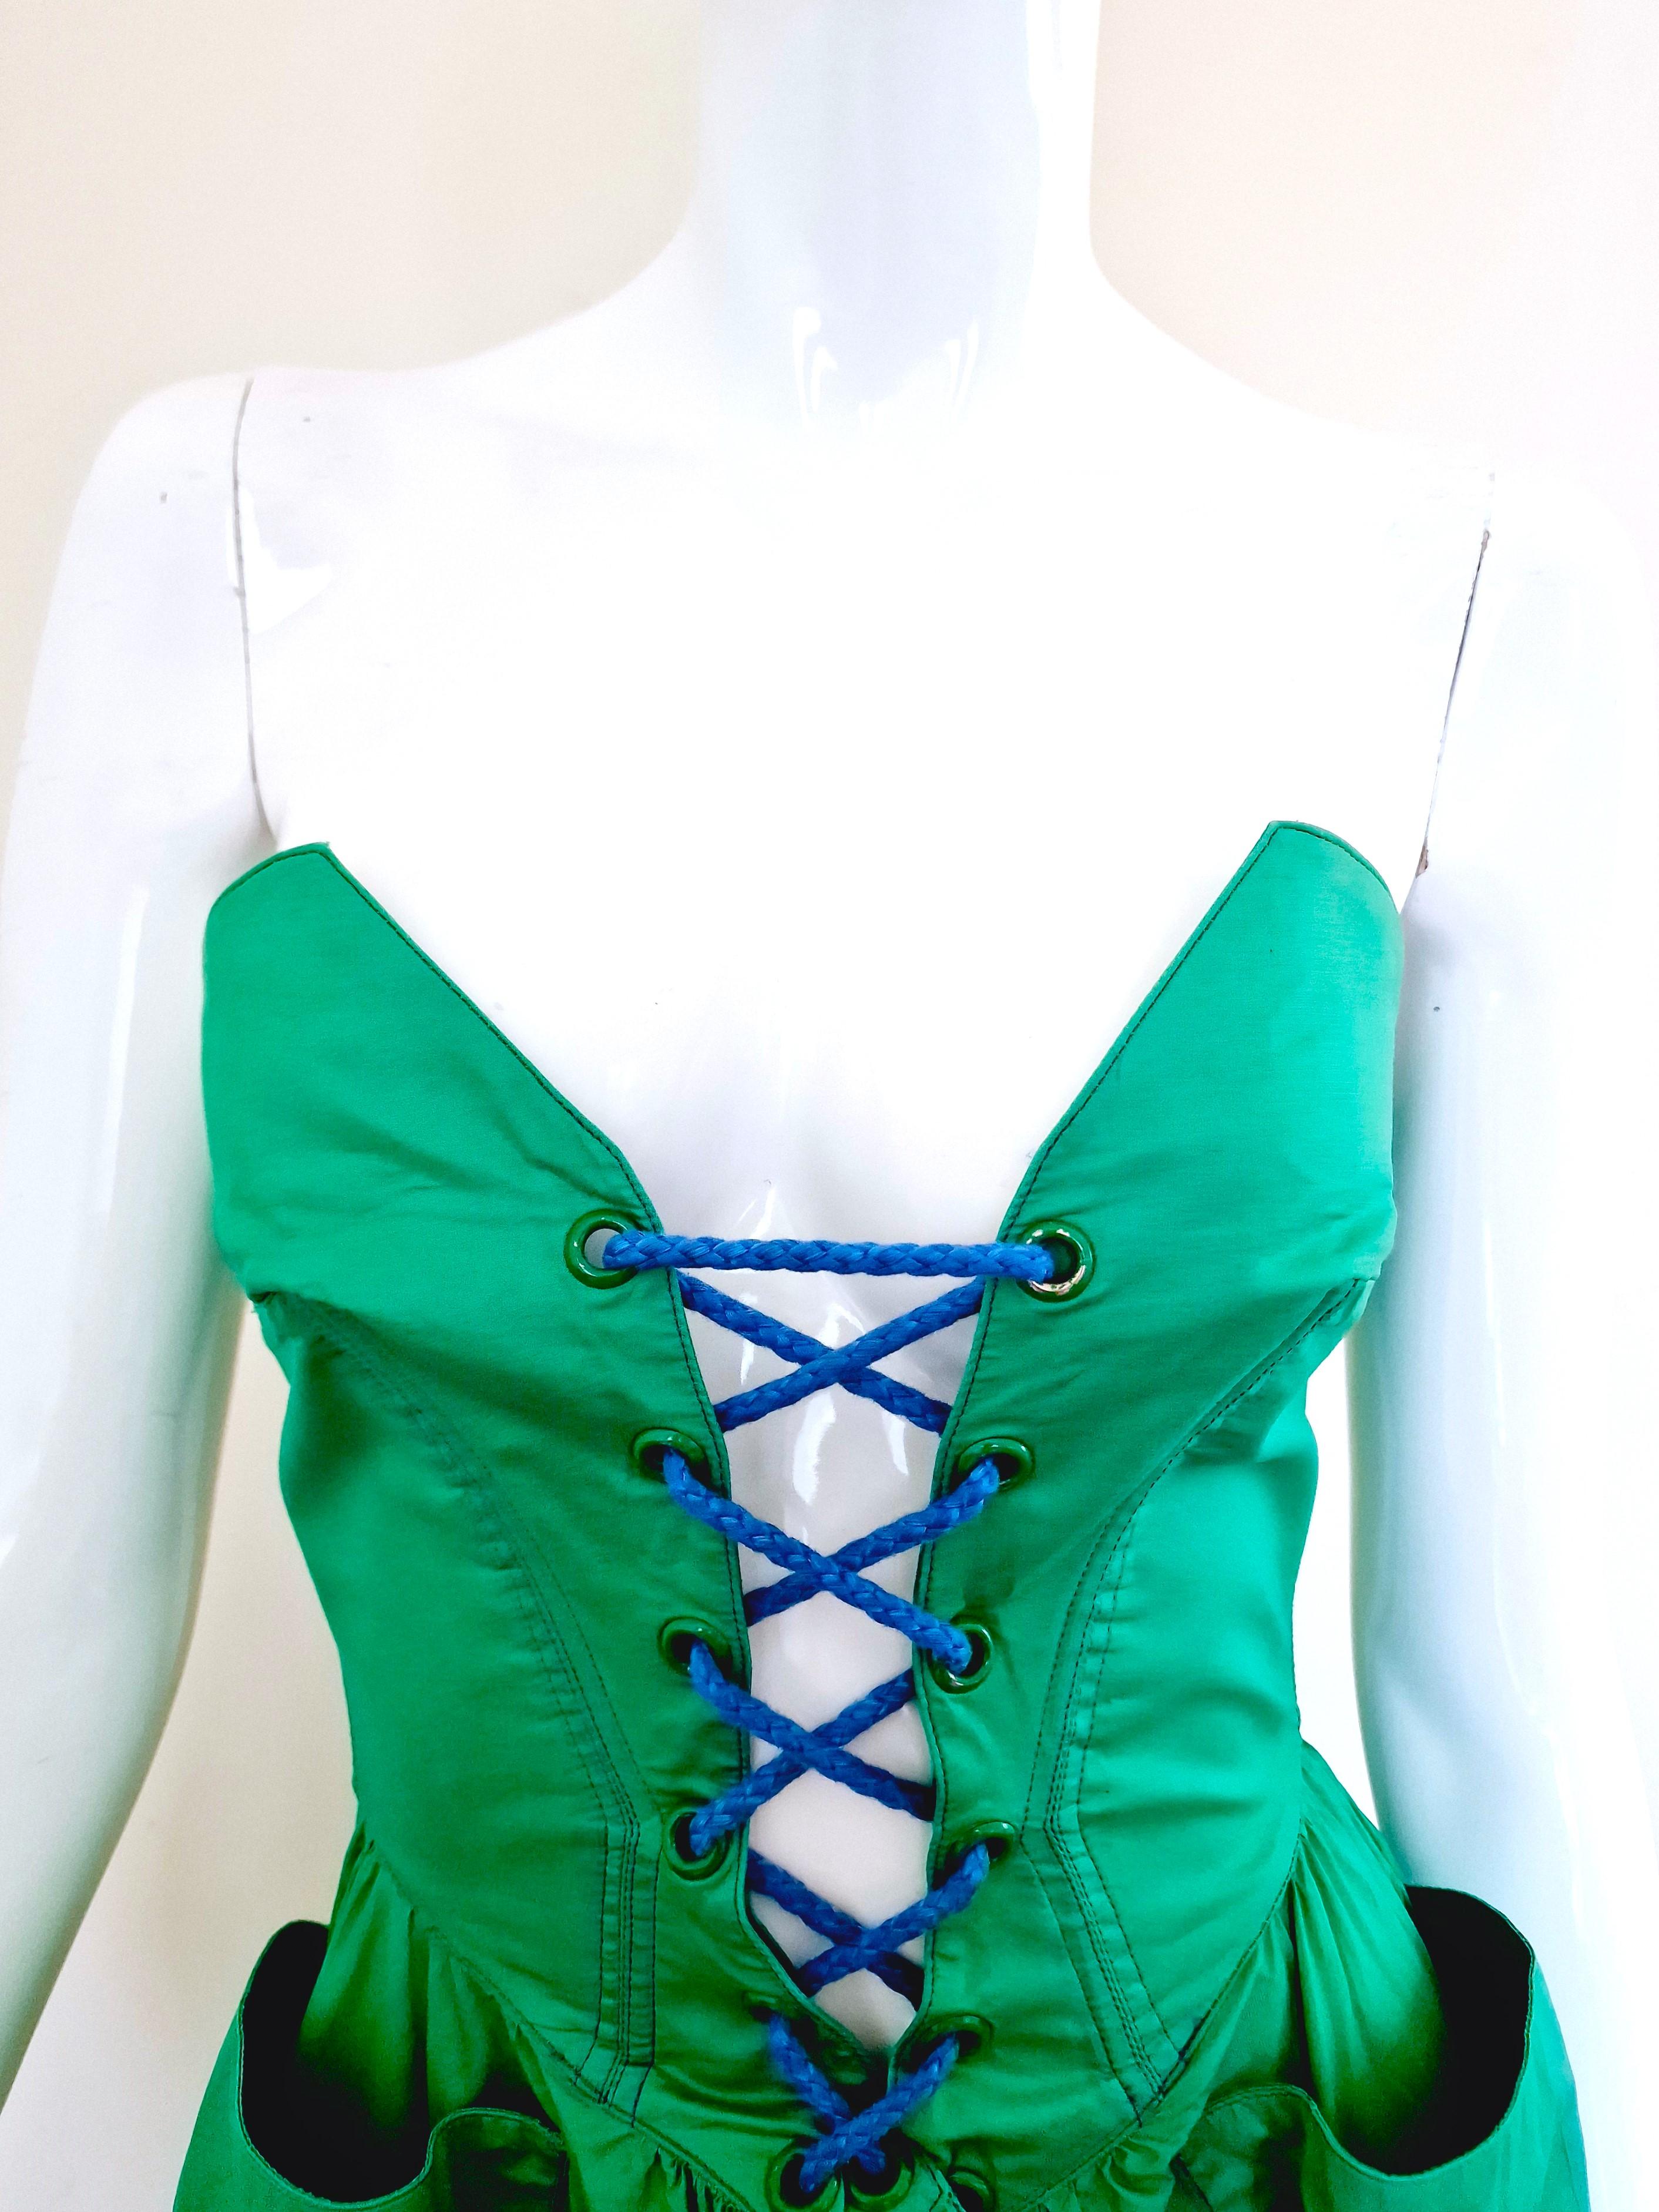 Thierry Mugler Corset Lace Up Green Vintage Couture Gown Prom Bustier Dress en vente 10